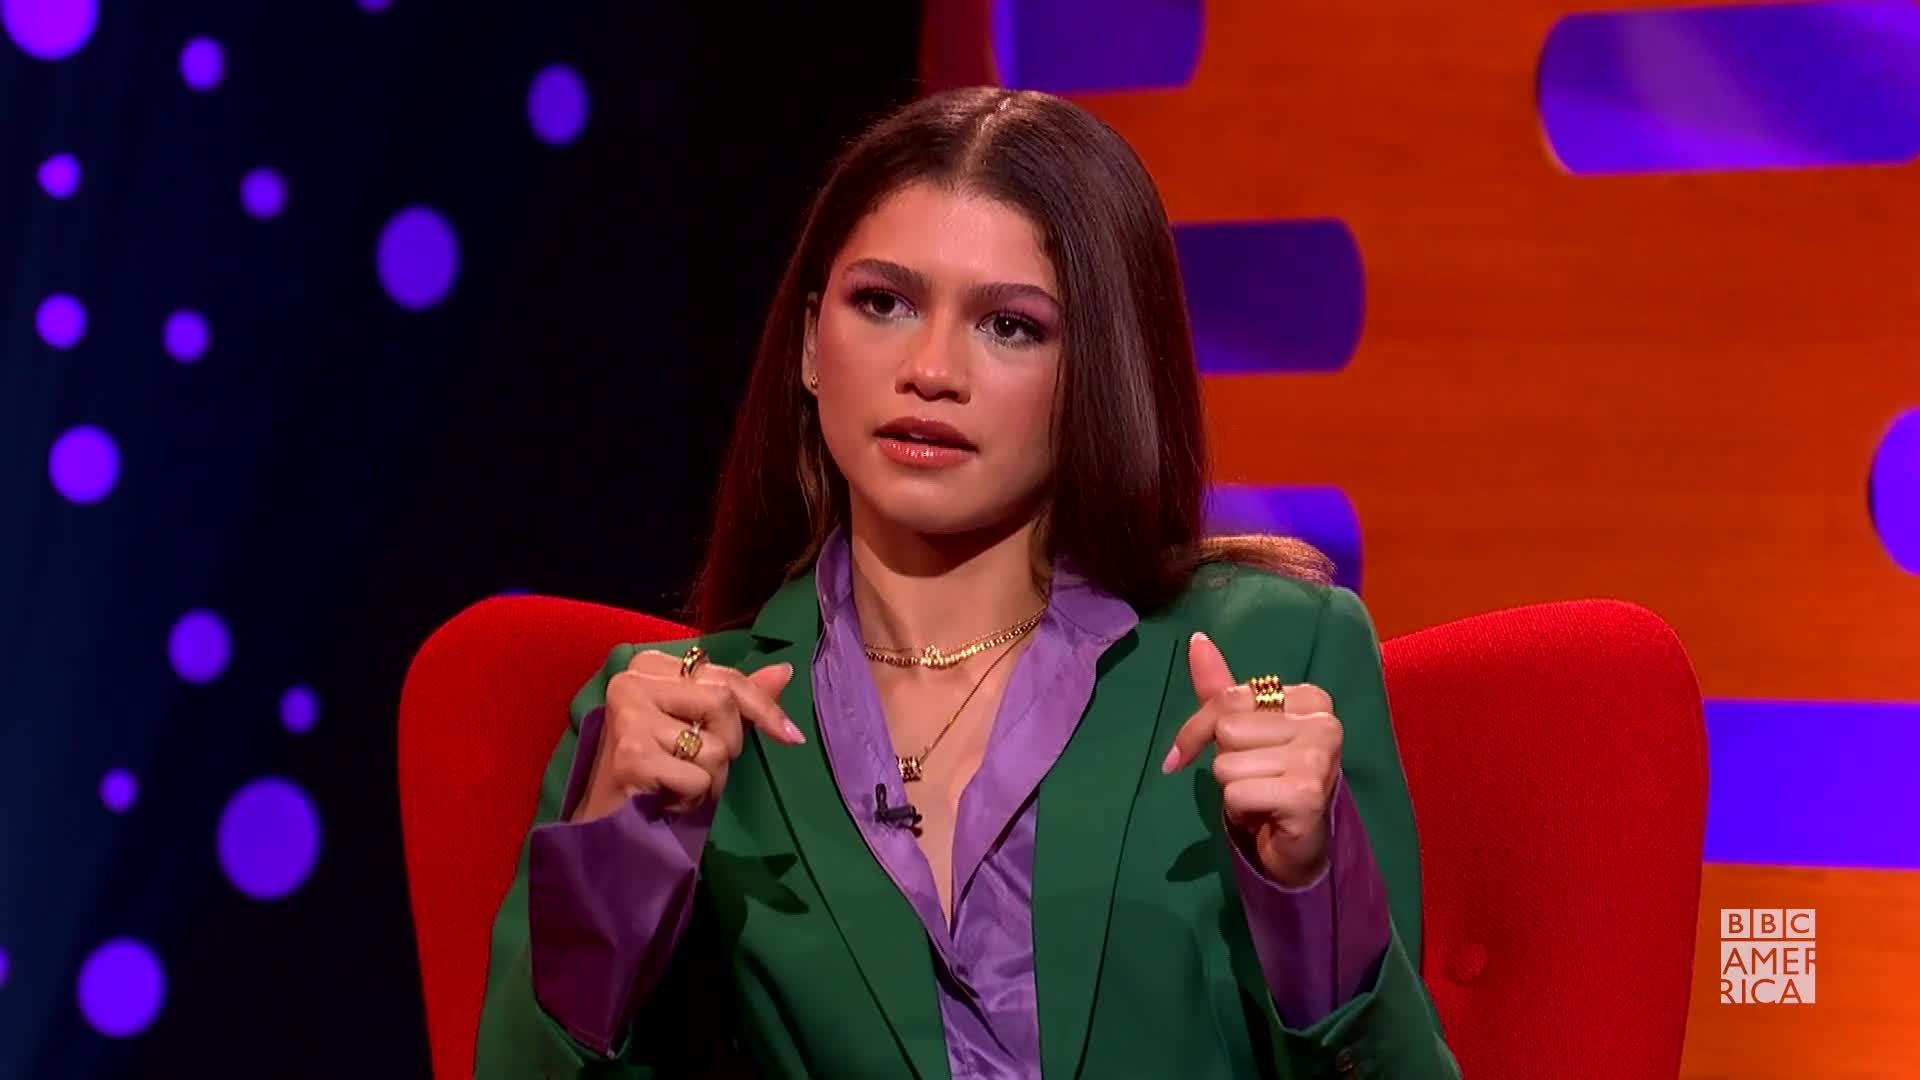 Watch Zendaya Likes to Knit during Tom Holland’s Spider-Man Fight Scenes | The Graham Norton Show Video Extras